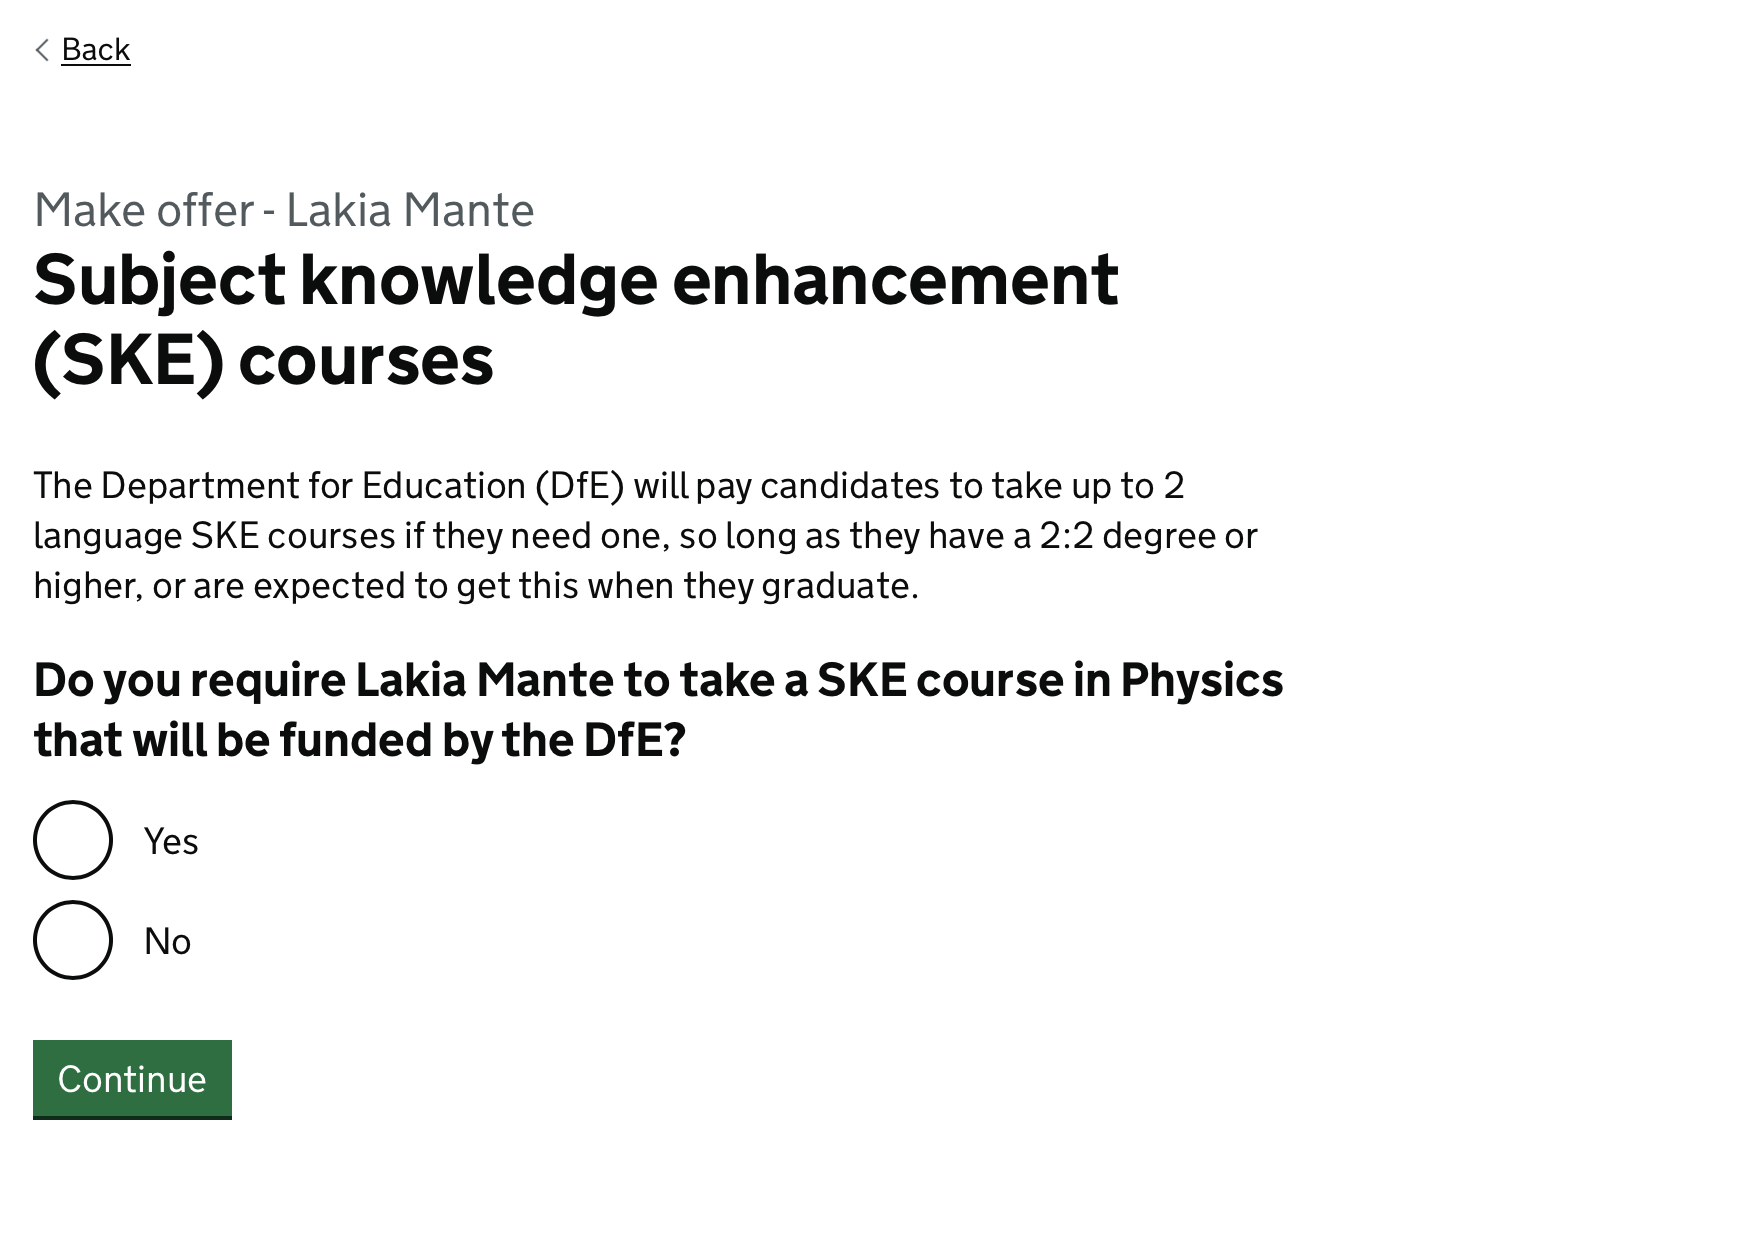 Screenshot with the heading ‘Subject knowledge enhancement (SKE) courses’. The page has a single question on it: ‘Do you require Laika Mante to take a SKE course in Physics that will be funded by the DfE?’ with radio button answers for Yes and No.